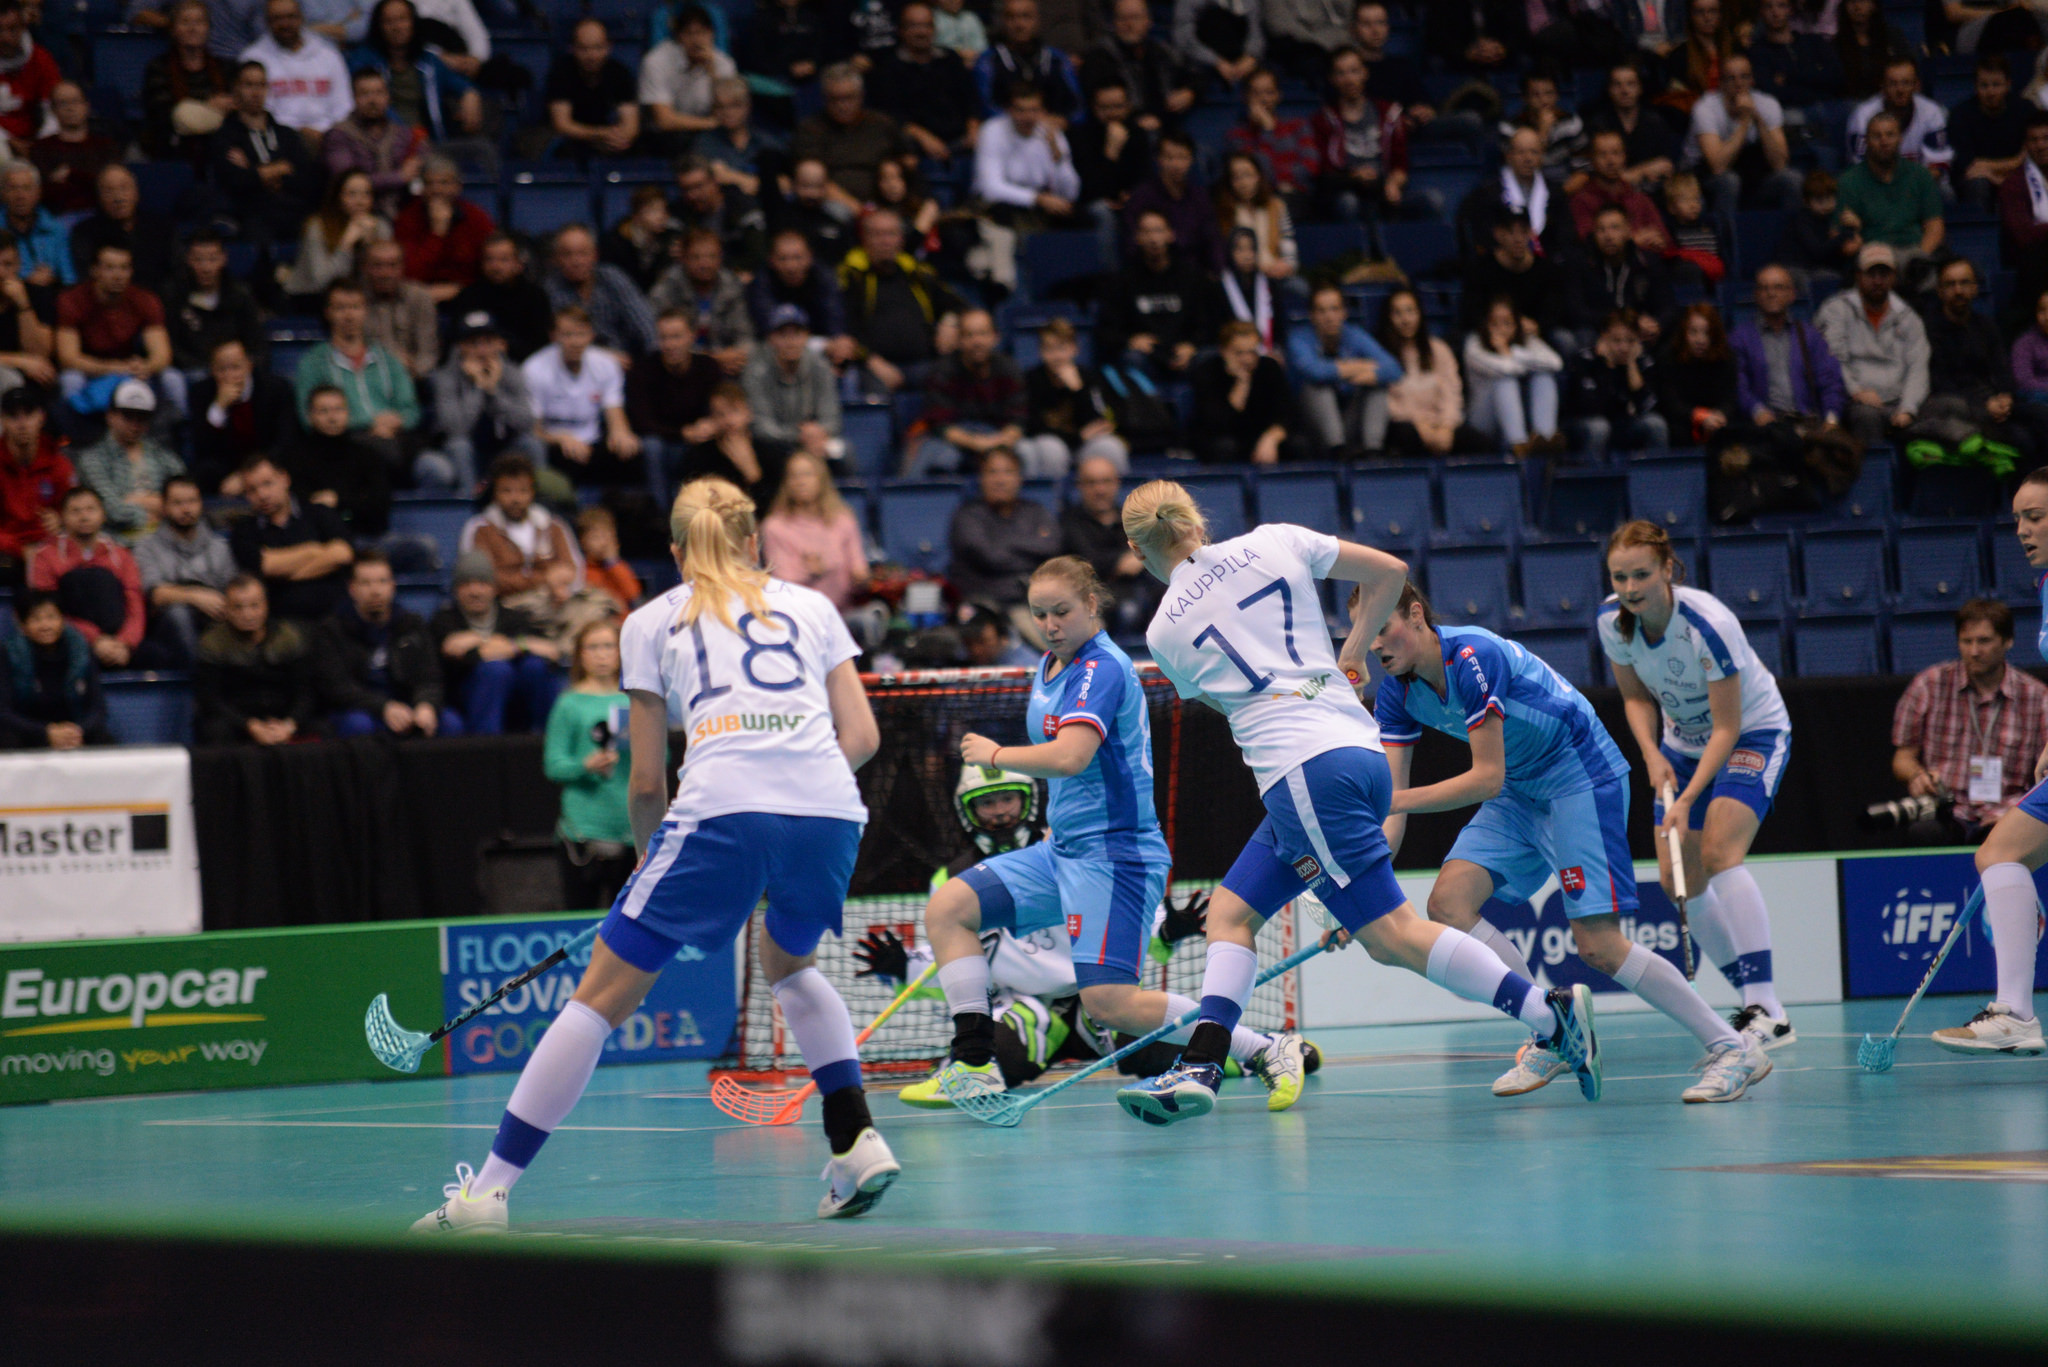 Finland proved too strong for the host nation as they ran out comfortable winners ©IFF